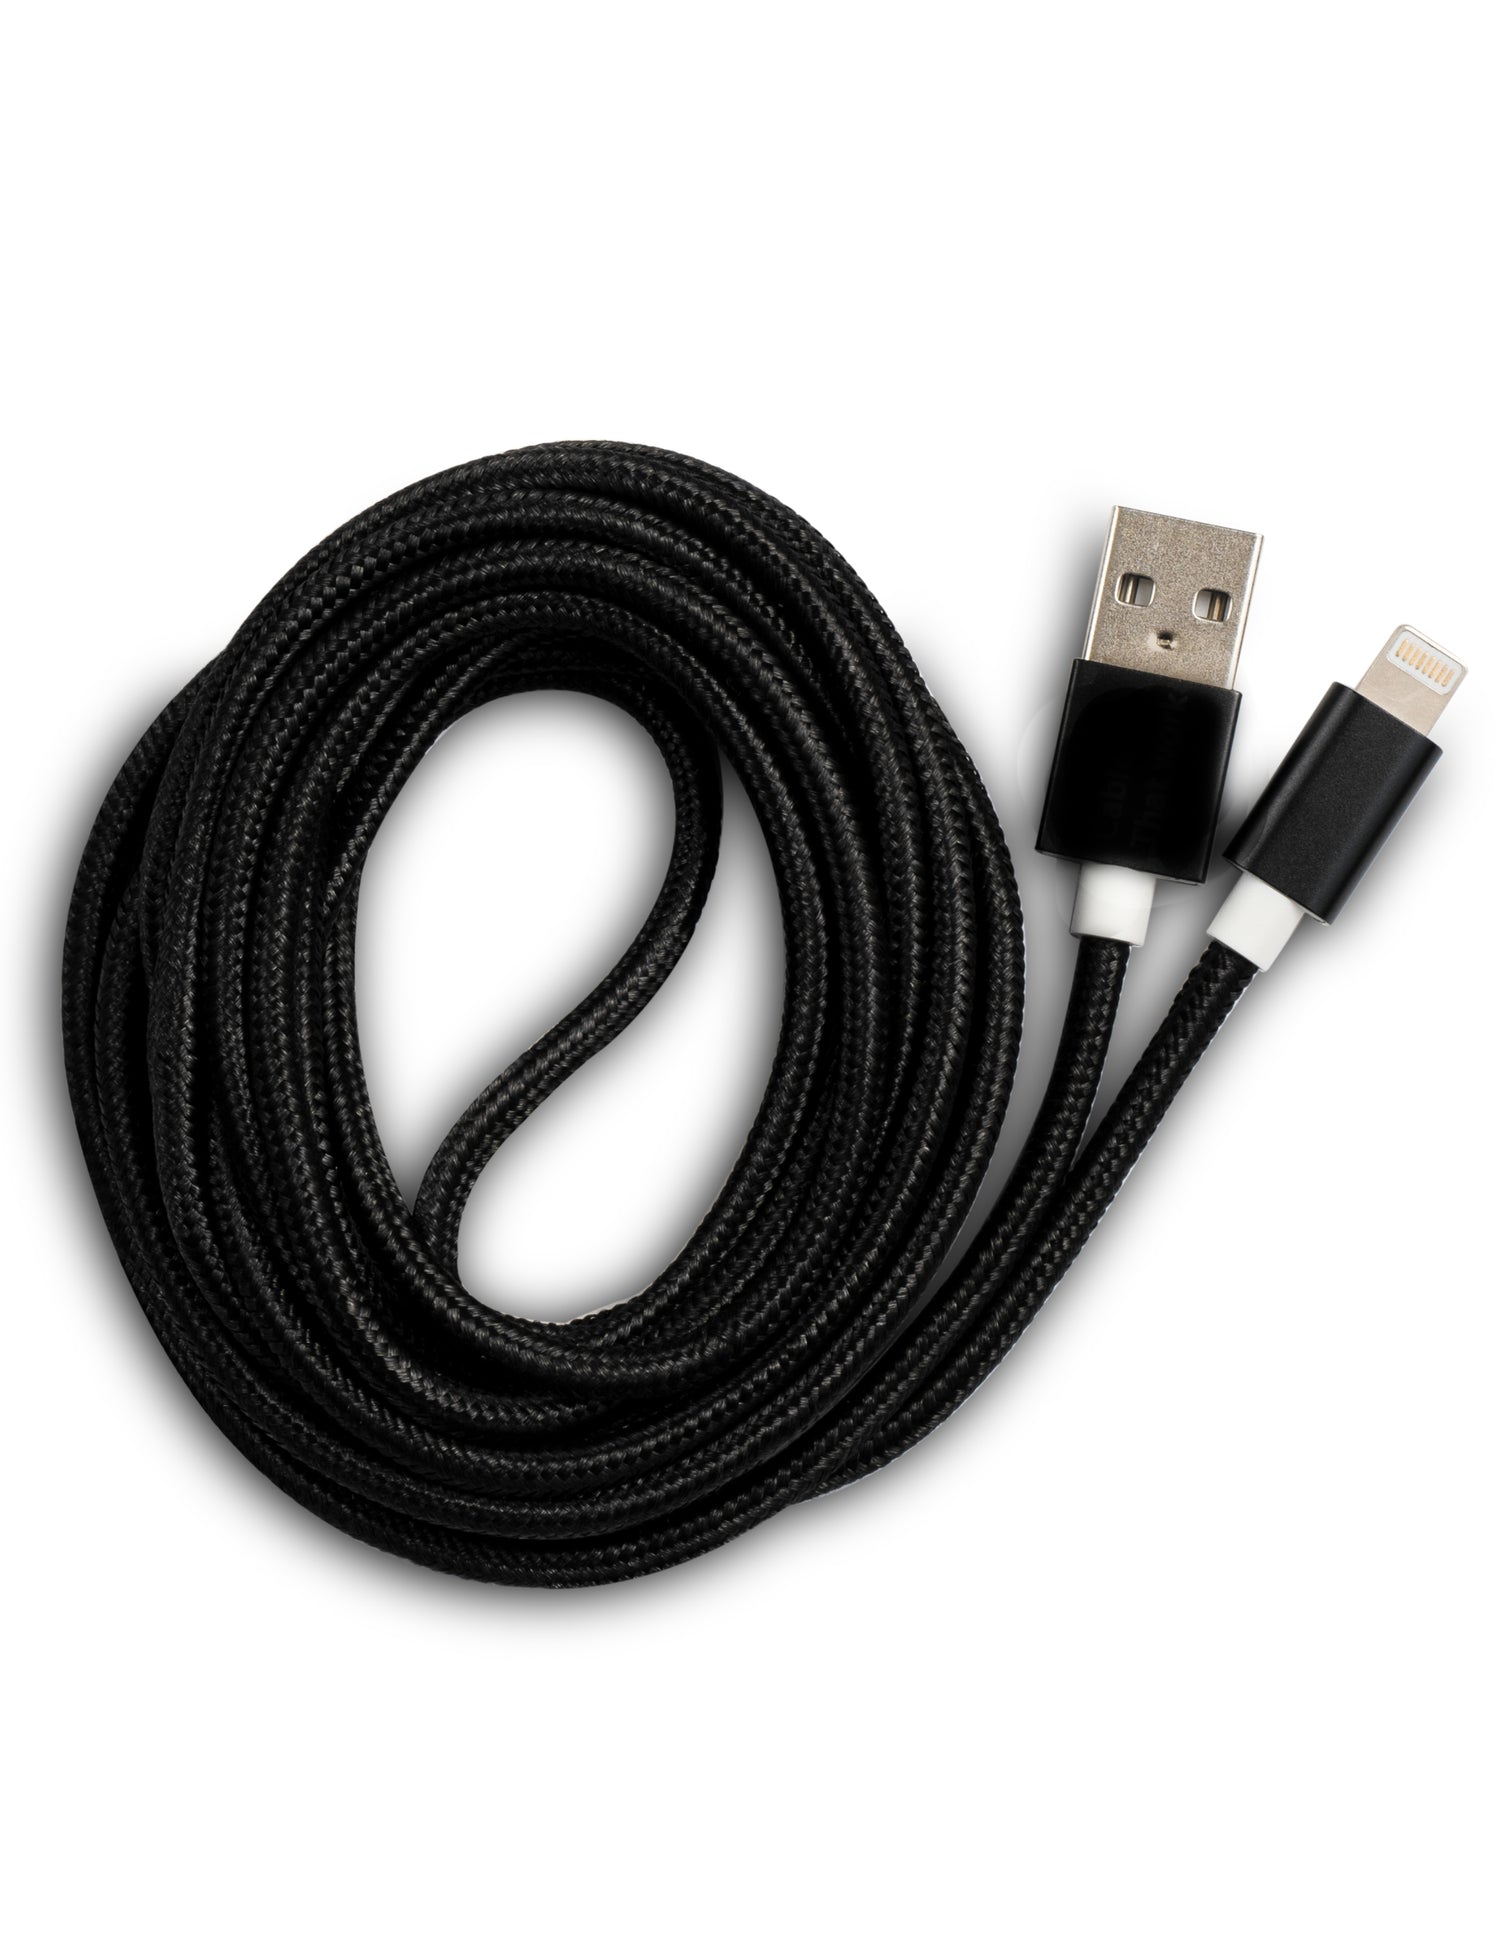 ''Nylon Braided Lightning to USB-A Charging Cable ''''3m, 10ft'''' (20 Count)''